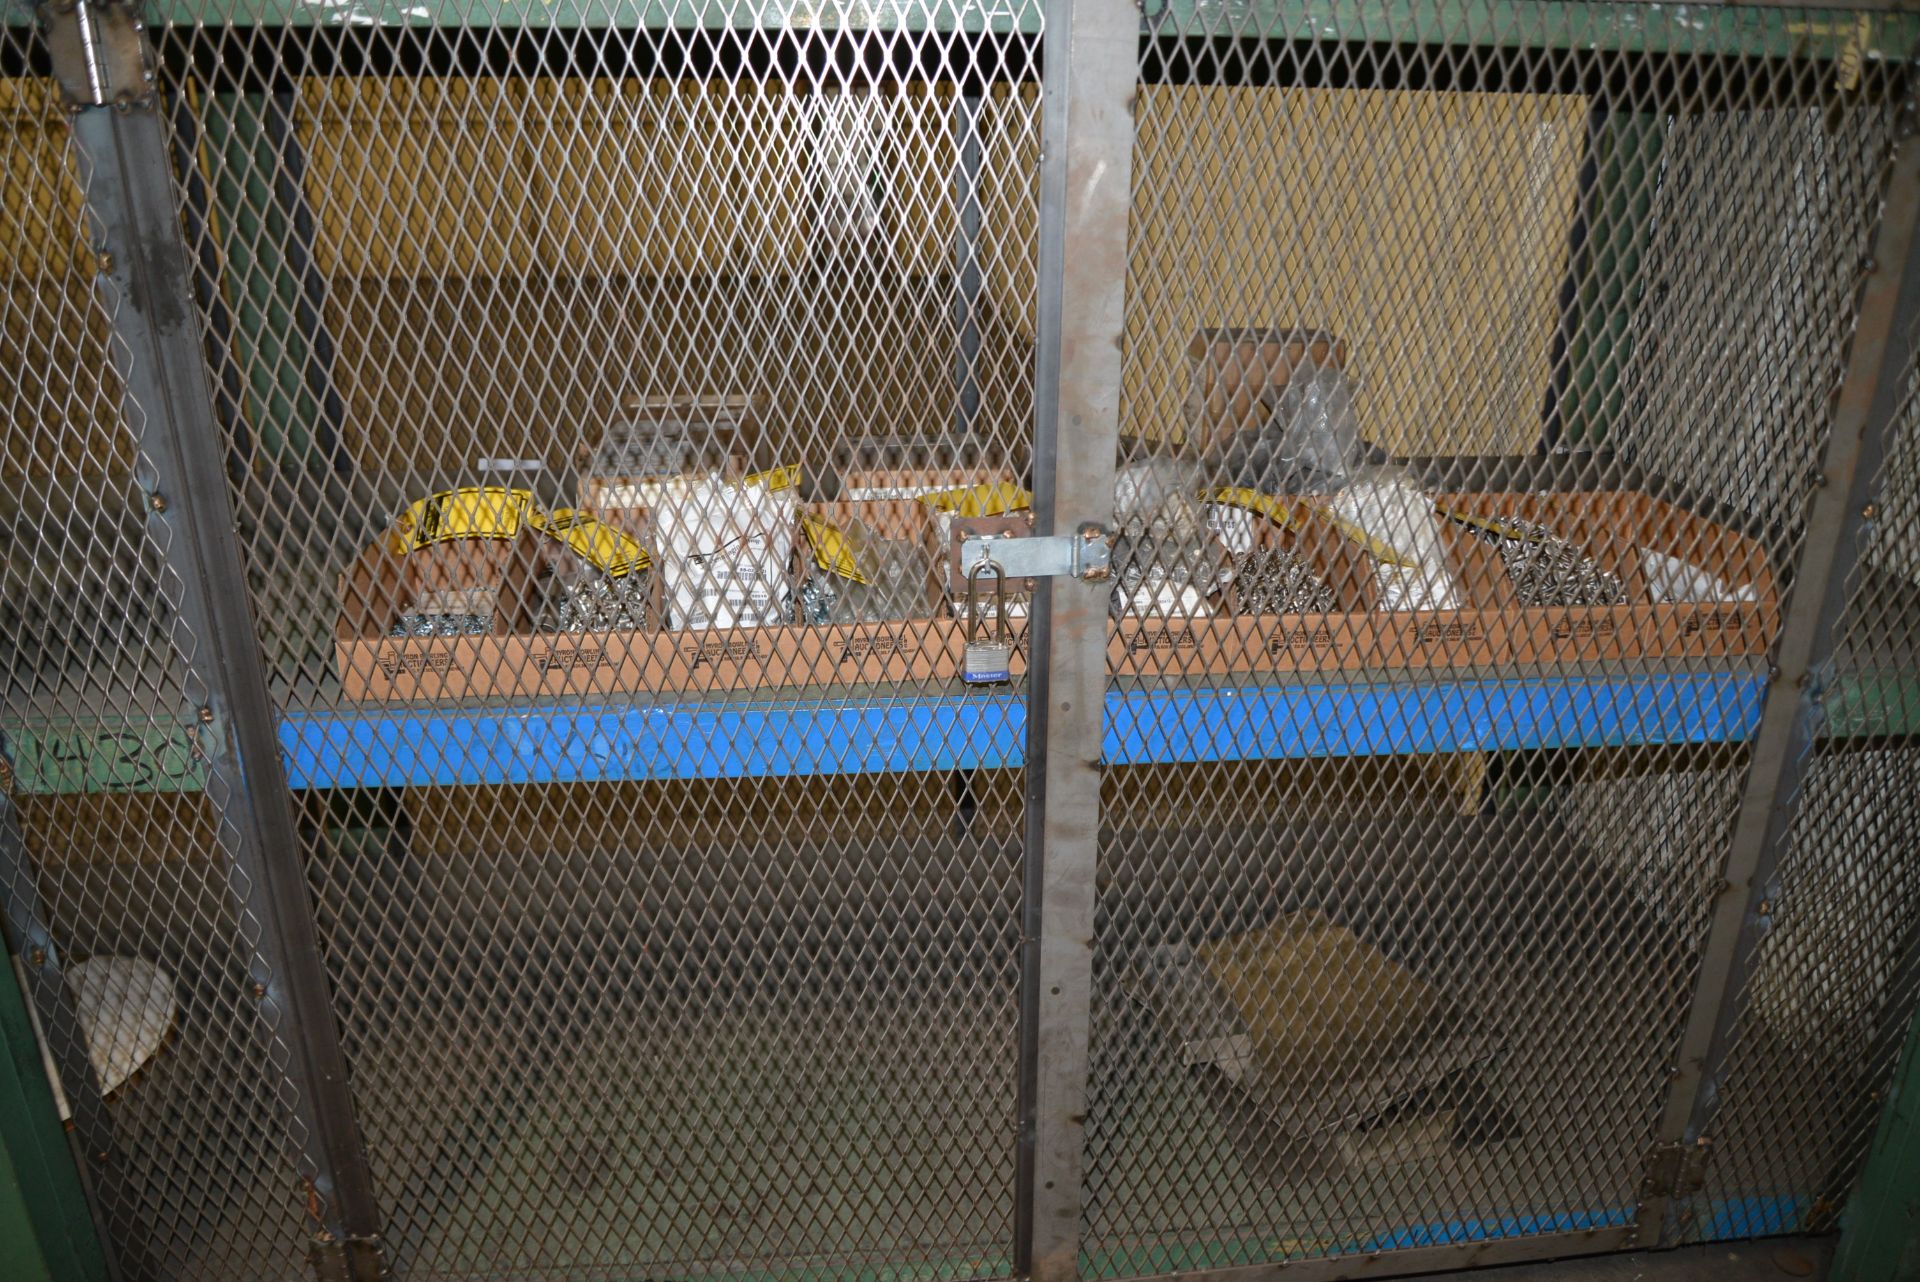 PEMSERTS IN TOOL CAGE - Image 2 of 2